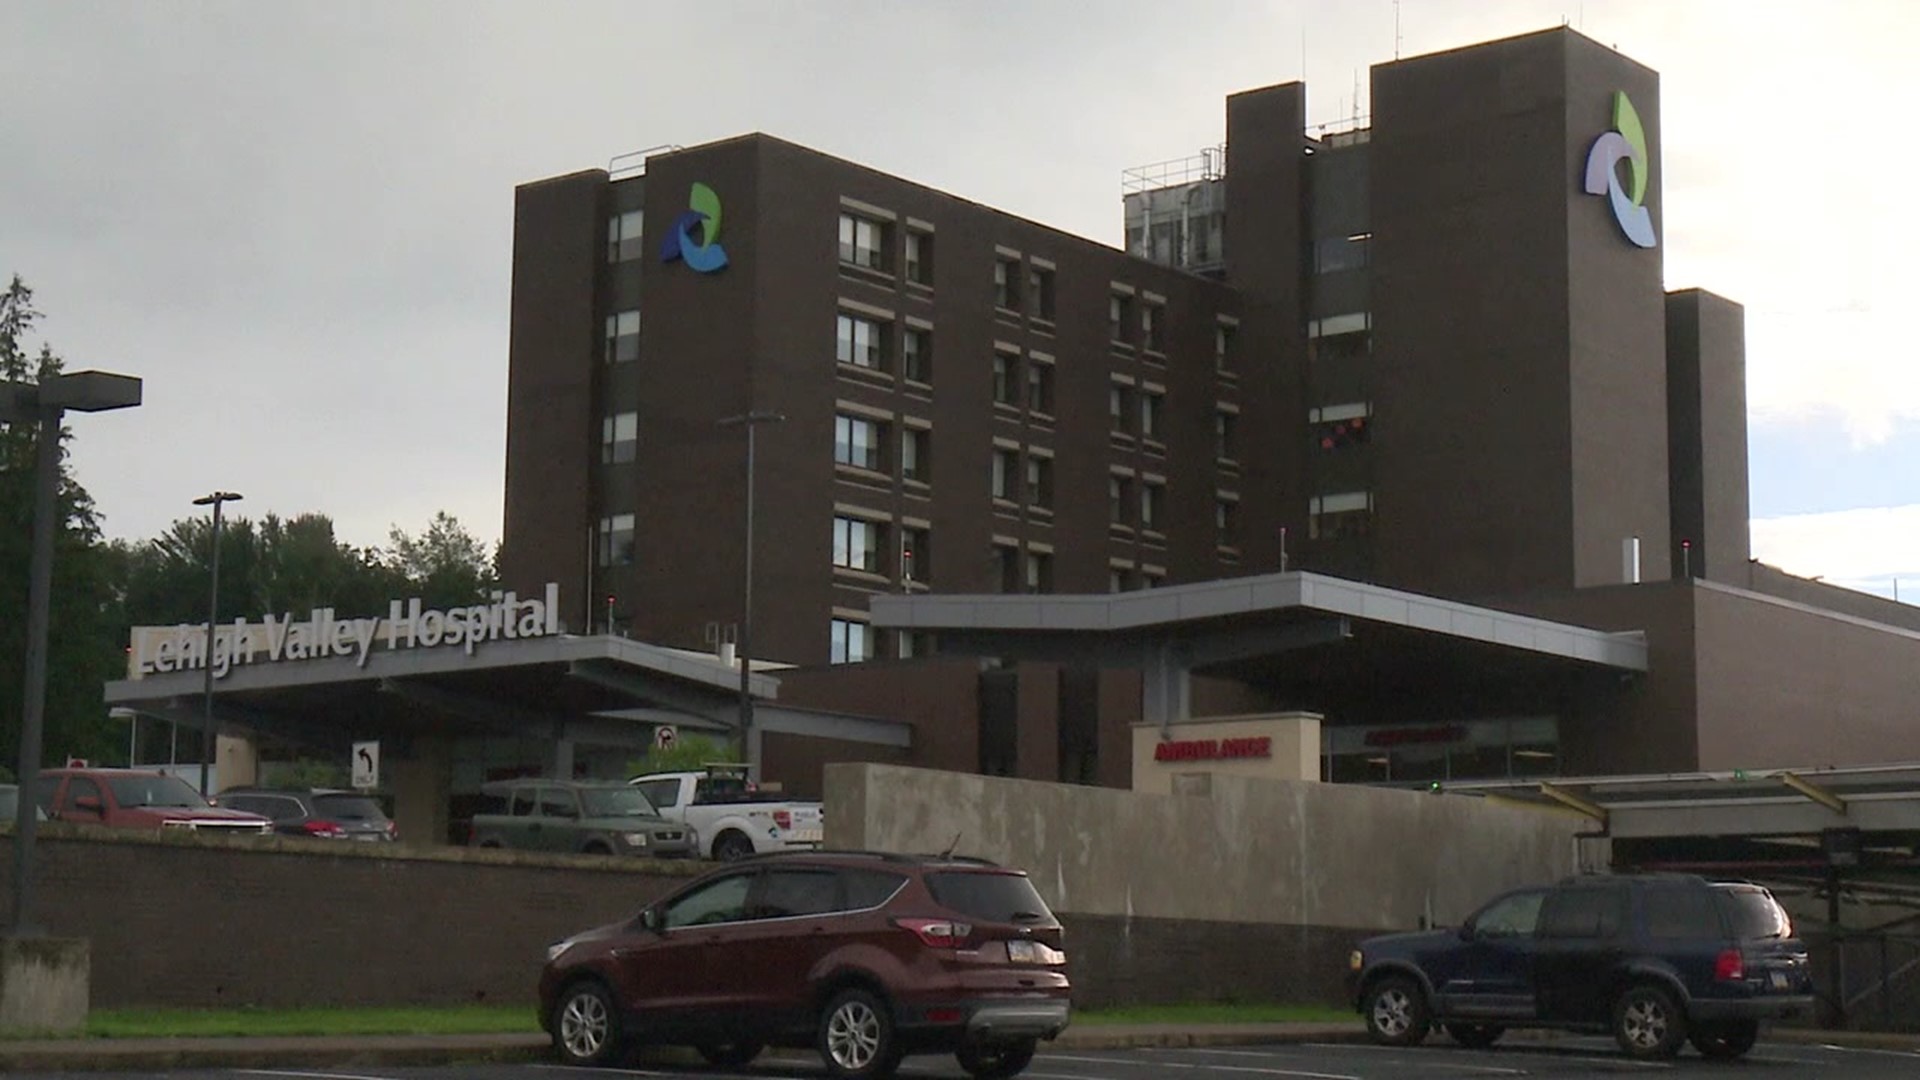 A doctor at Lehigh Valley Hospital-Hazleton says the Keystone State is seeing the same strain that hit southern states over the summer.